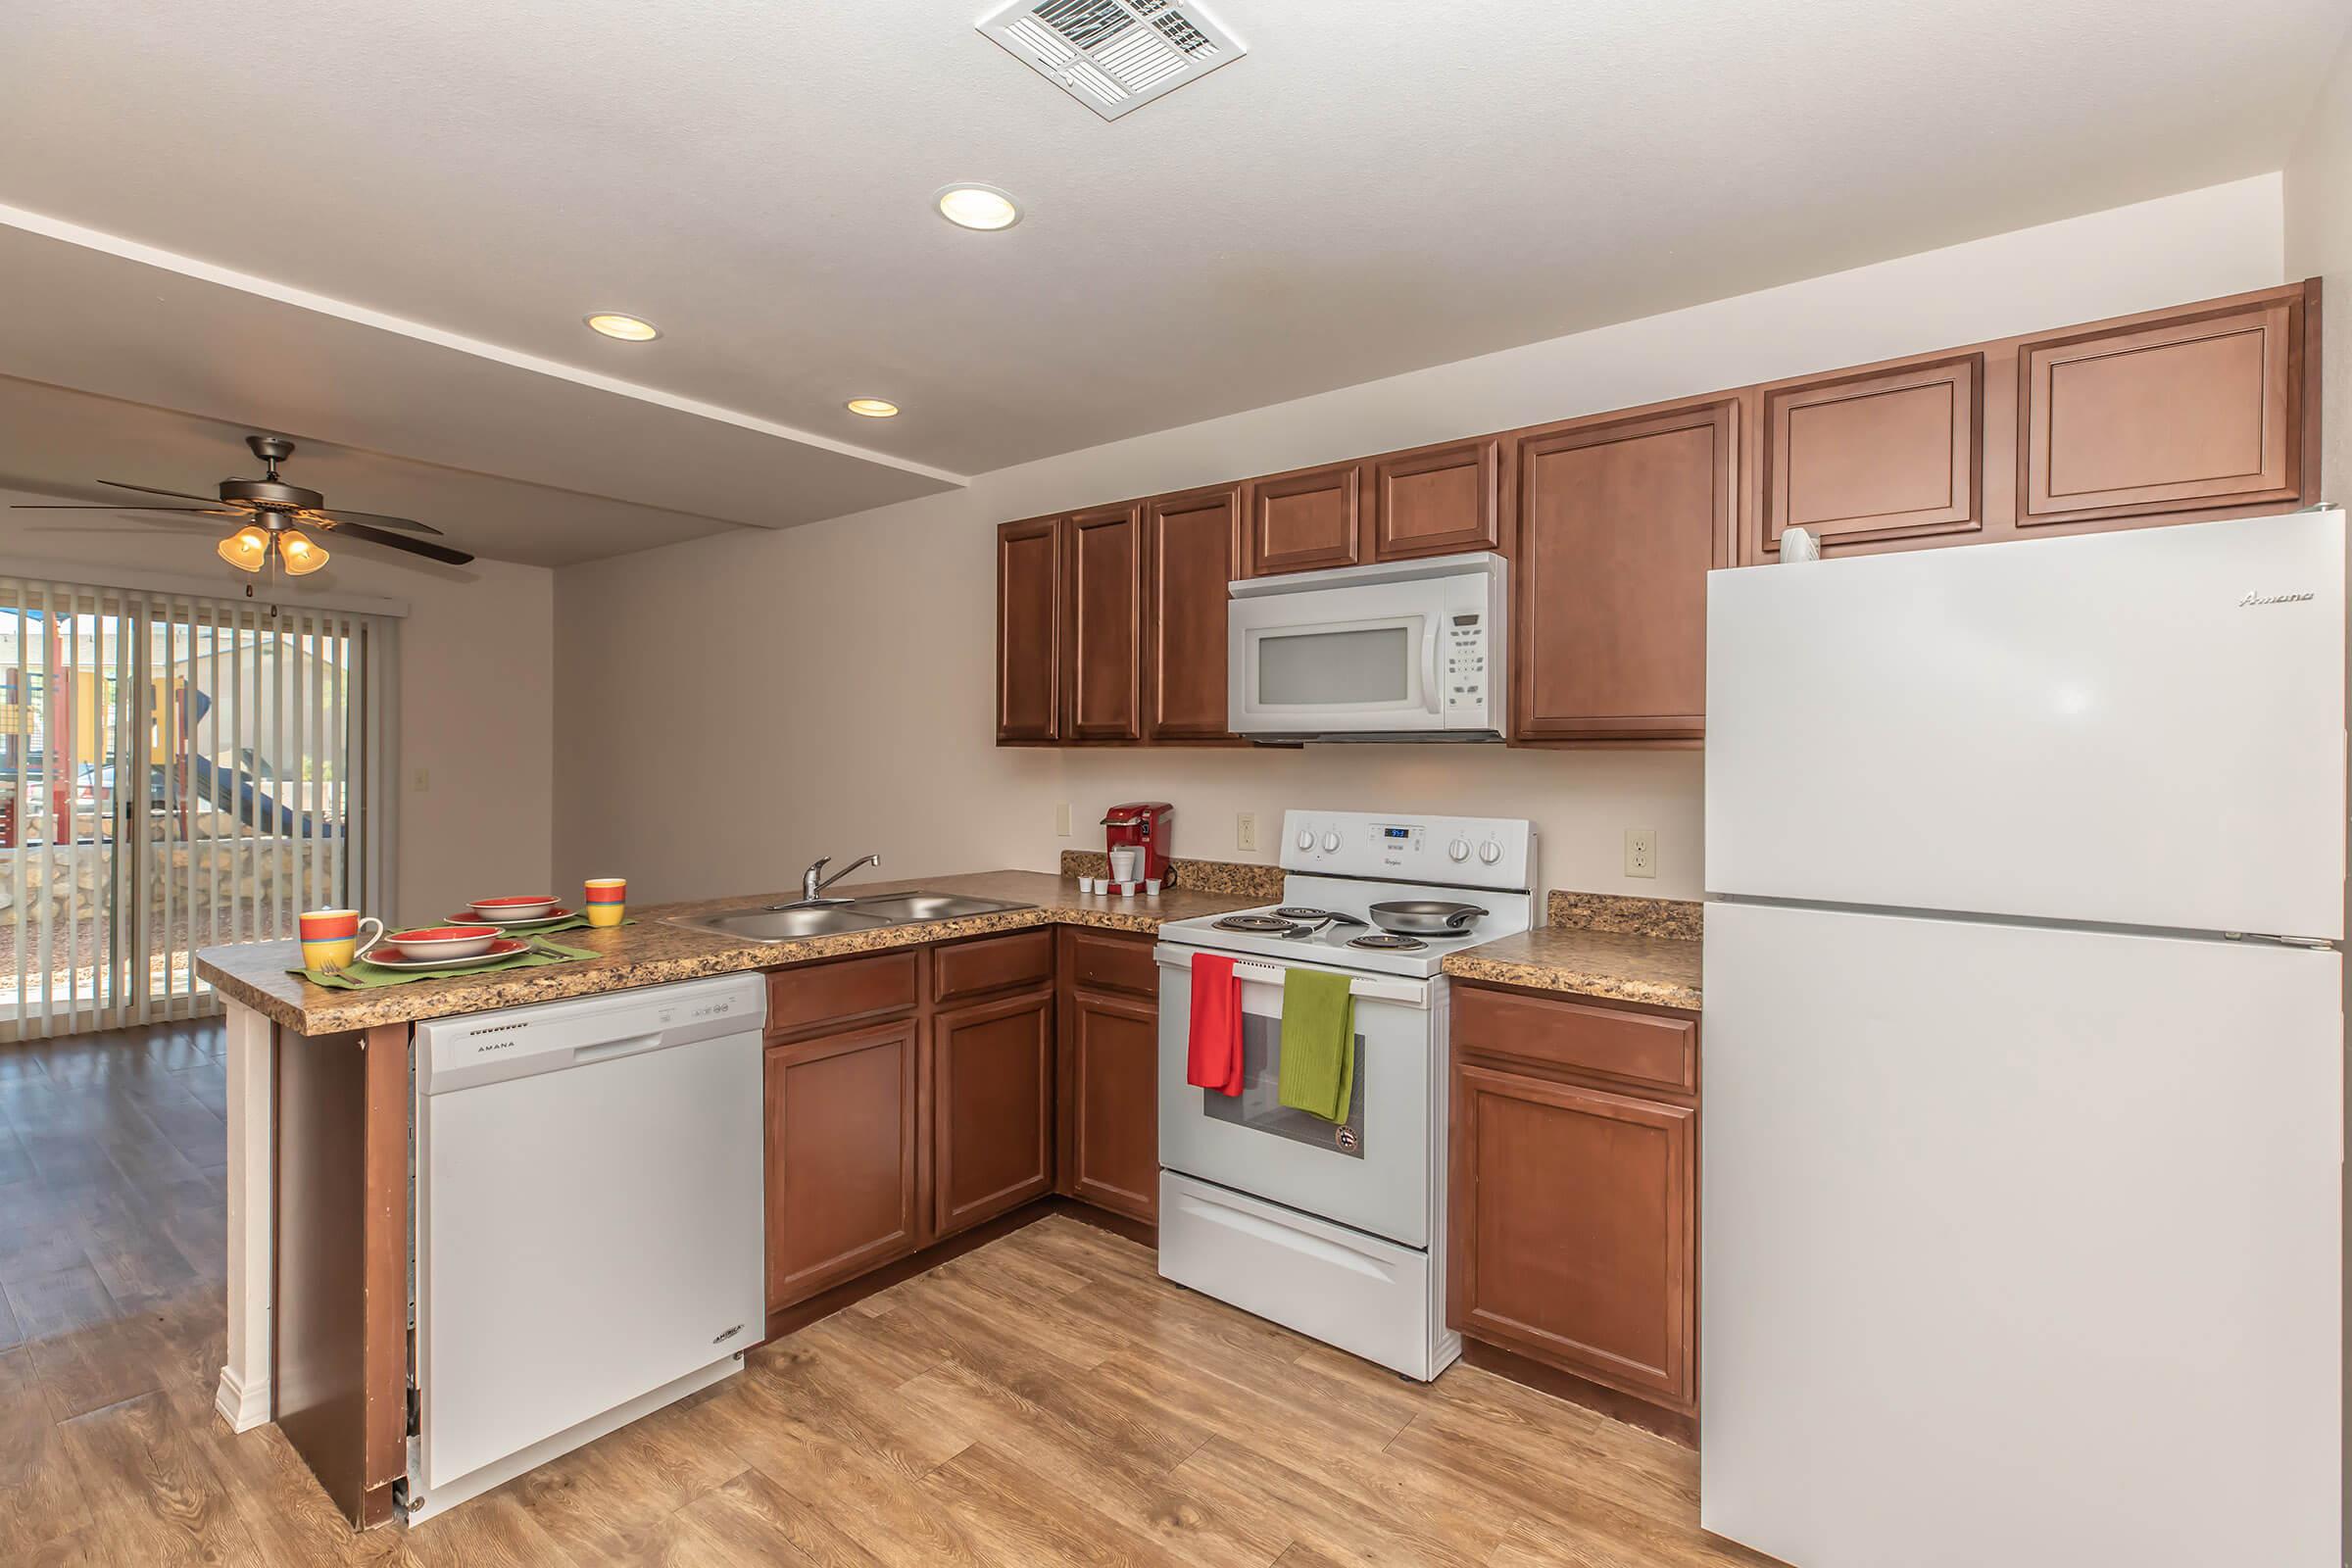 LOTS OF CABINET SPACE AT DESERT SKY TOWNHOMES